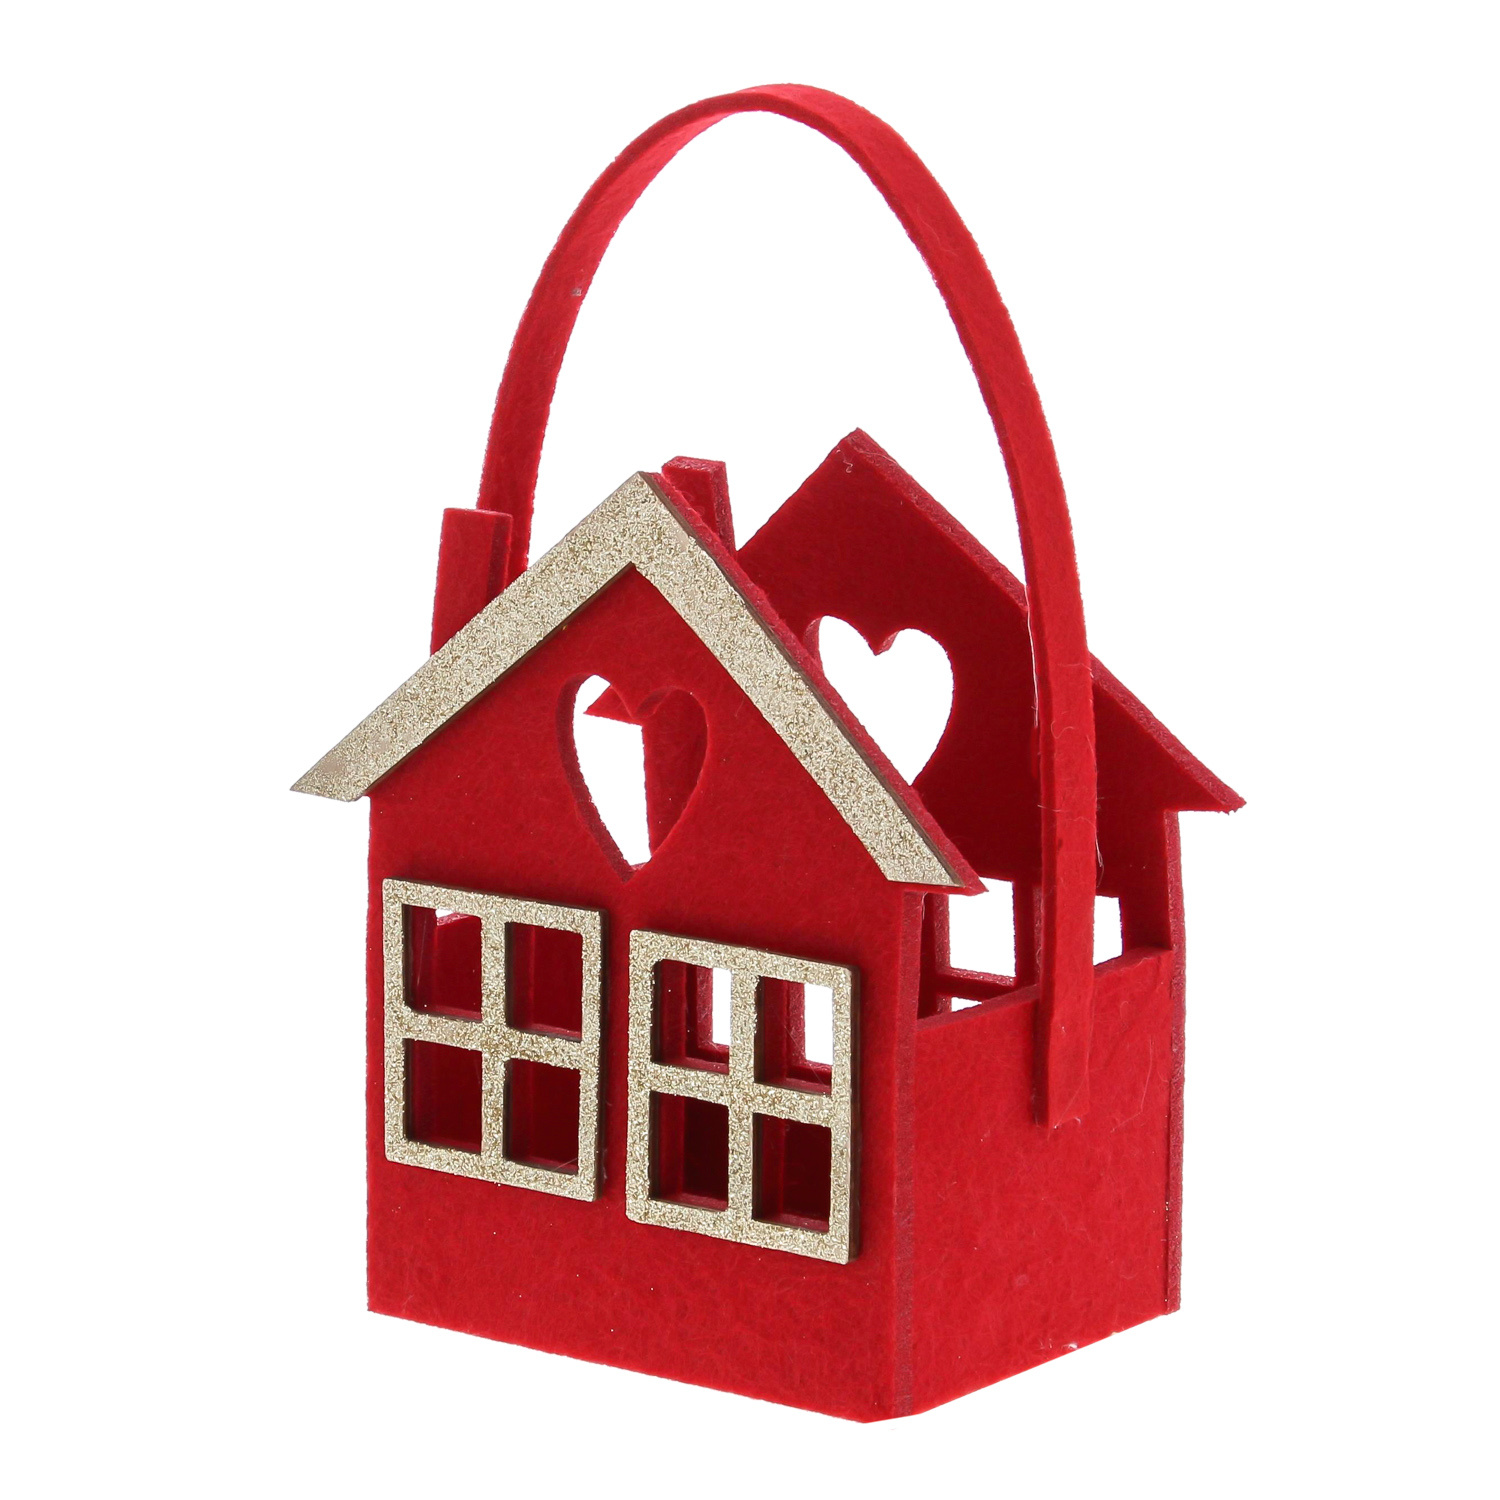 Felt house basket with handle red / gold - 150*90*220mm - 6 pieces